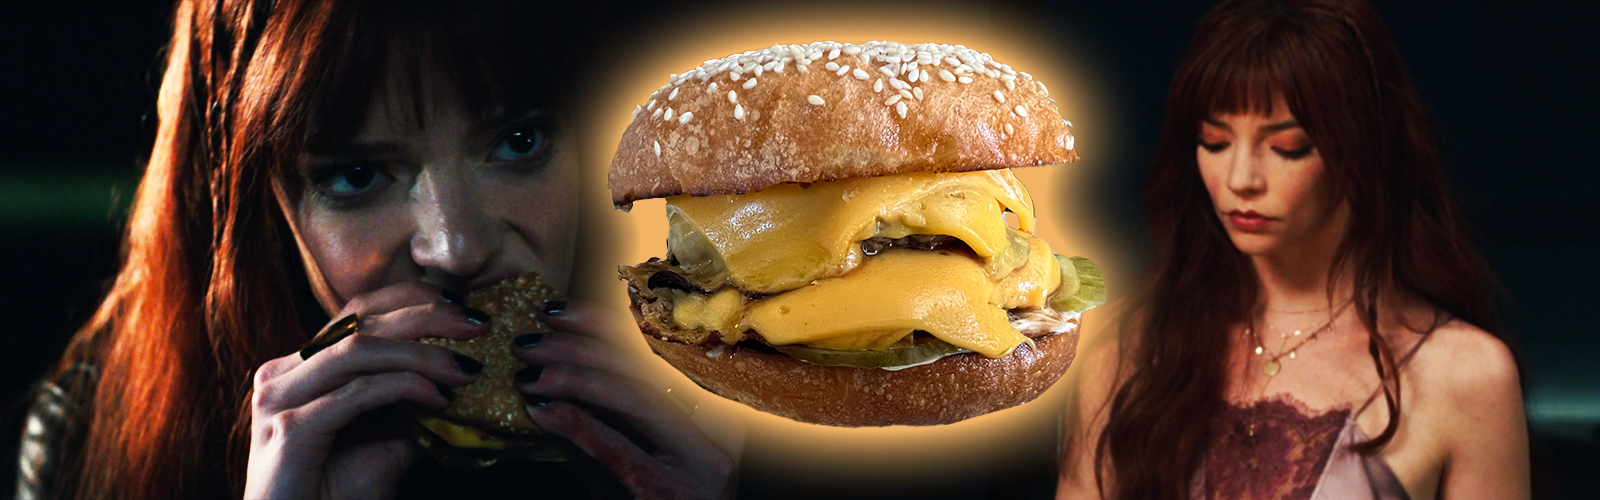 The Perfect Cheeseburger Recipe From 'The Menu